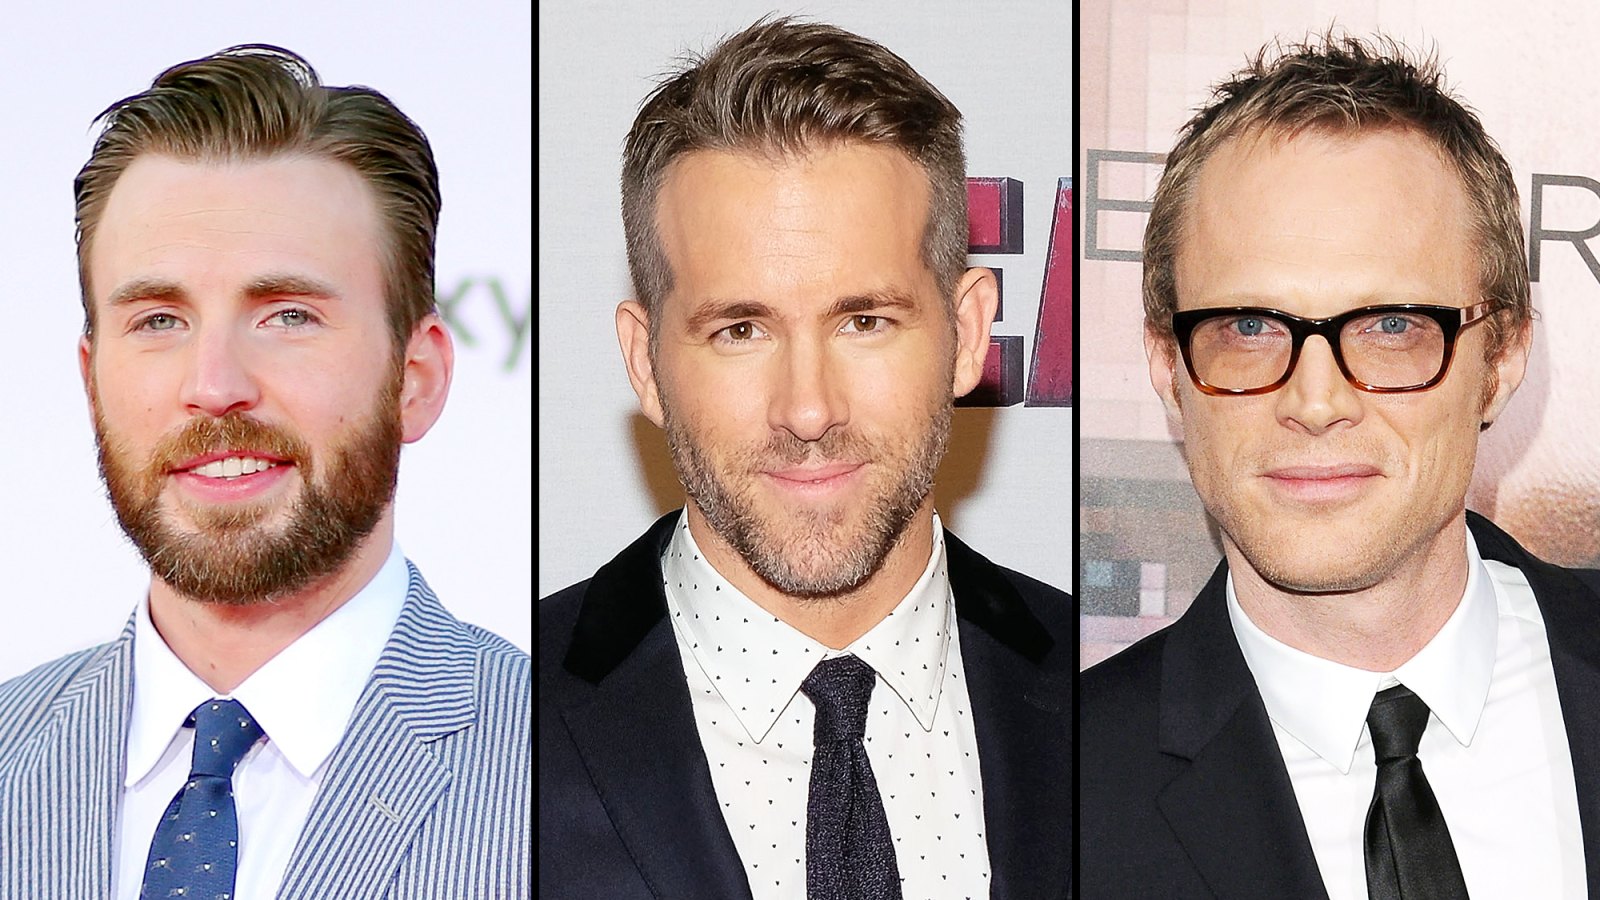 Chris Evans Ryan Reynolds Paul Bettany Commit to Make Dying Boy’s Avengers Wish Come True